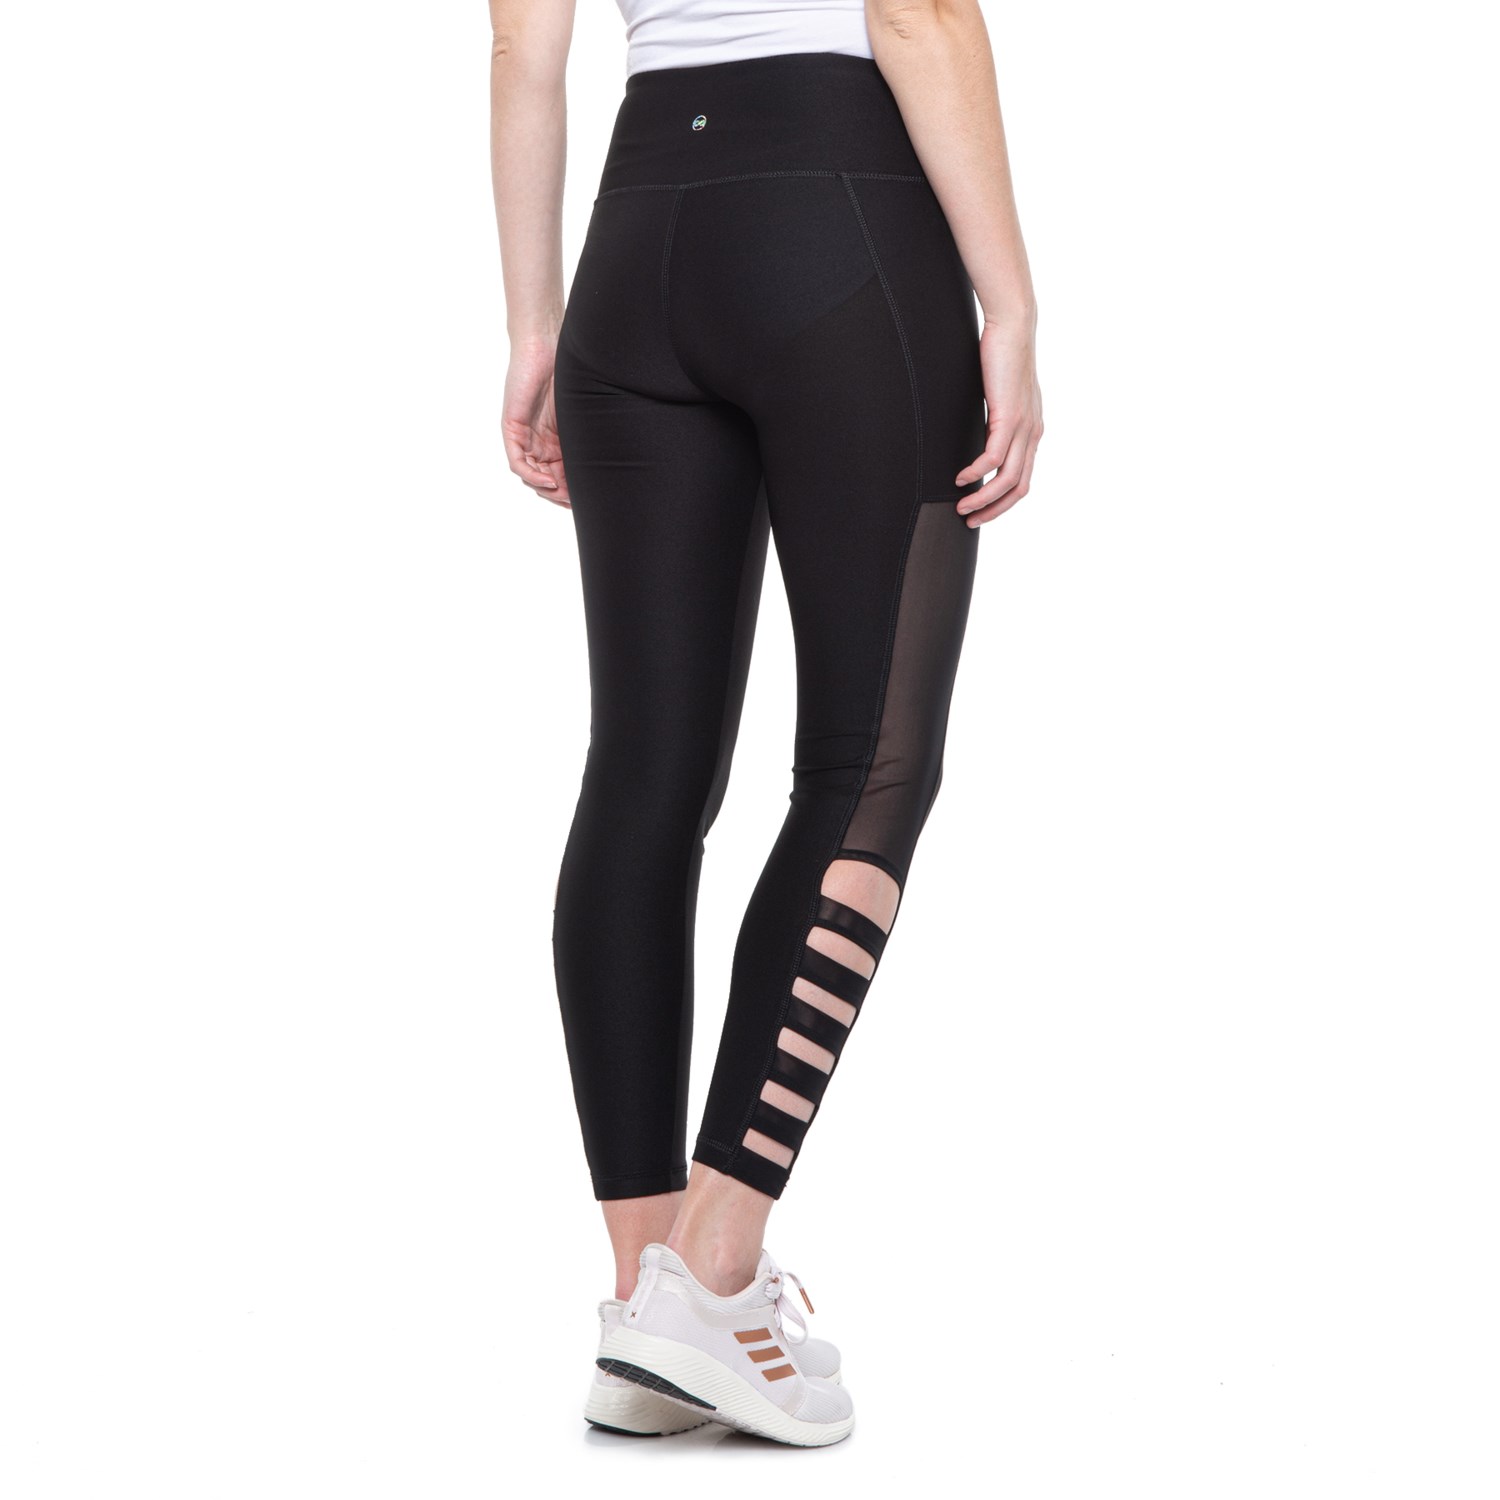 absolutely-fit-mesh-and-lattice-leggings-for-women-save-57